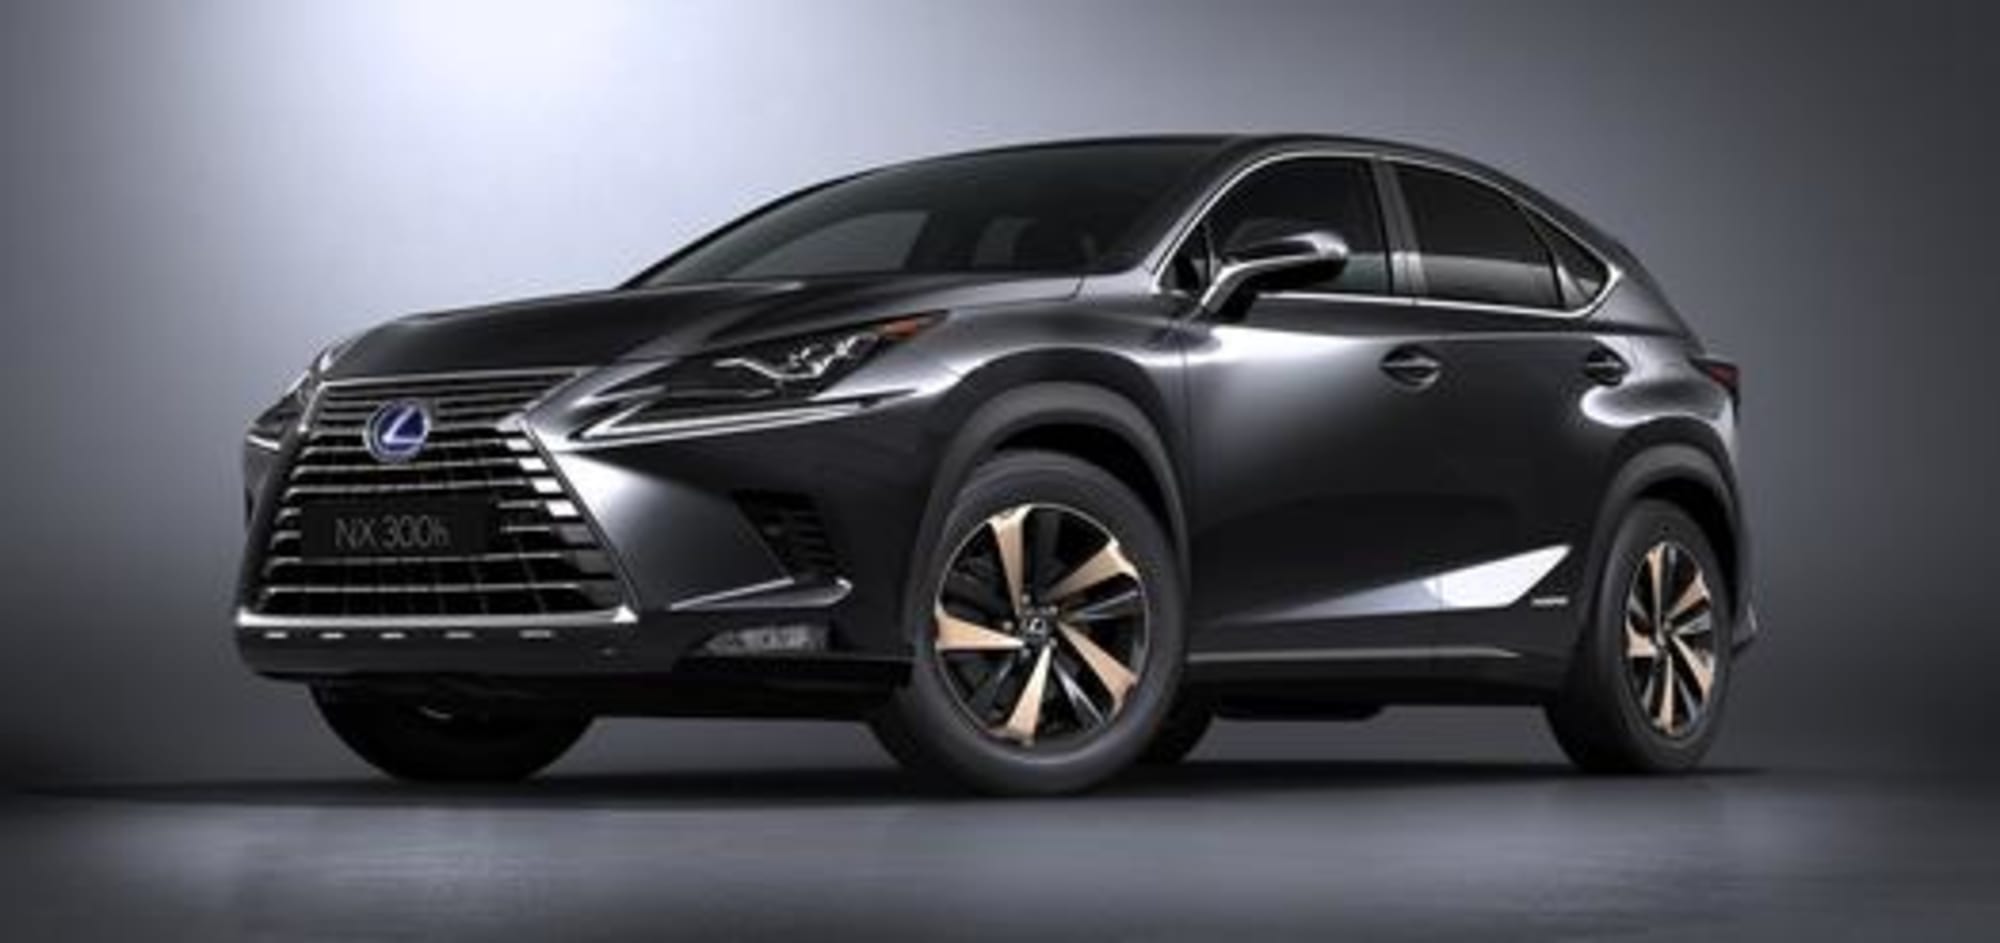 2018 Lexus Nx 300 Review After A Week With The Vehicle 5122